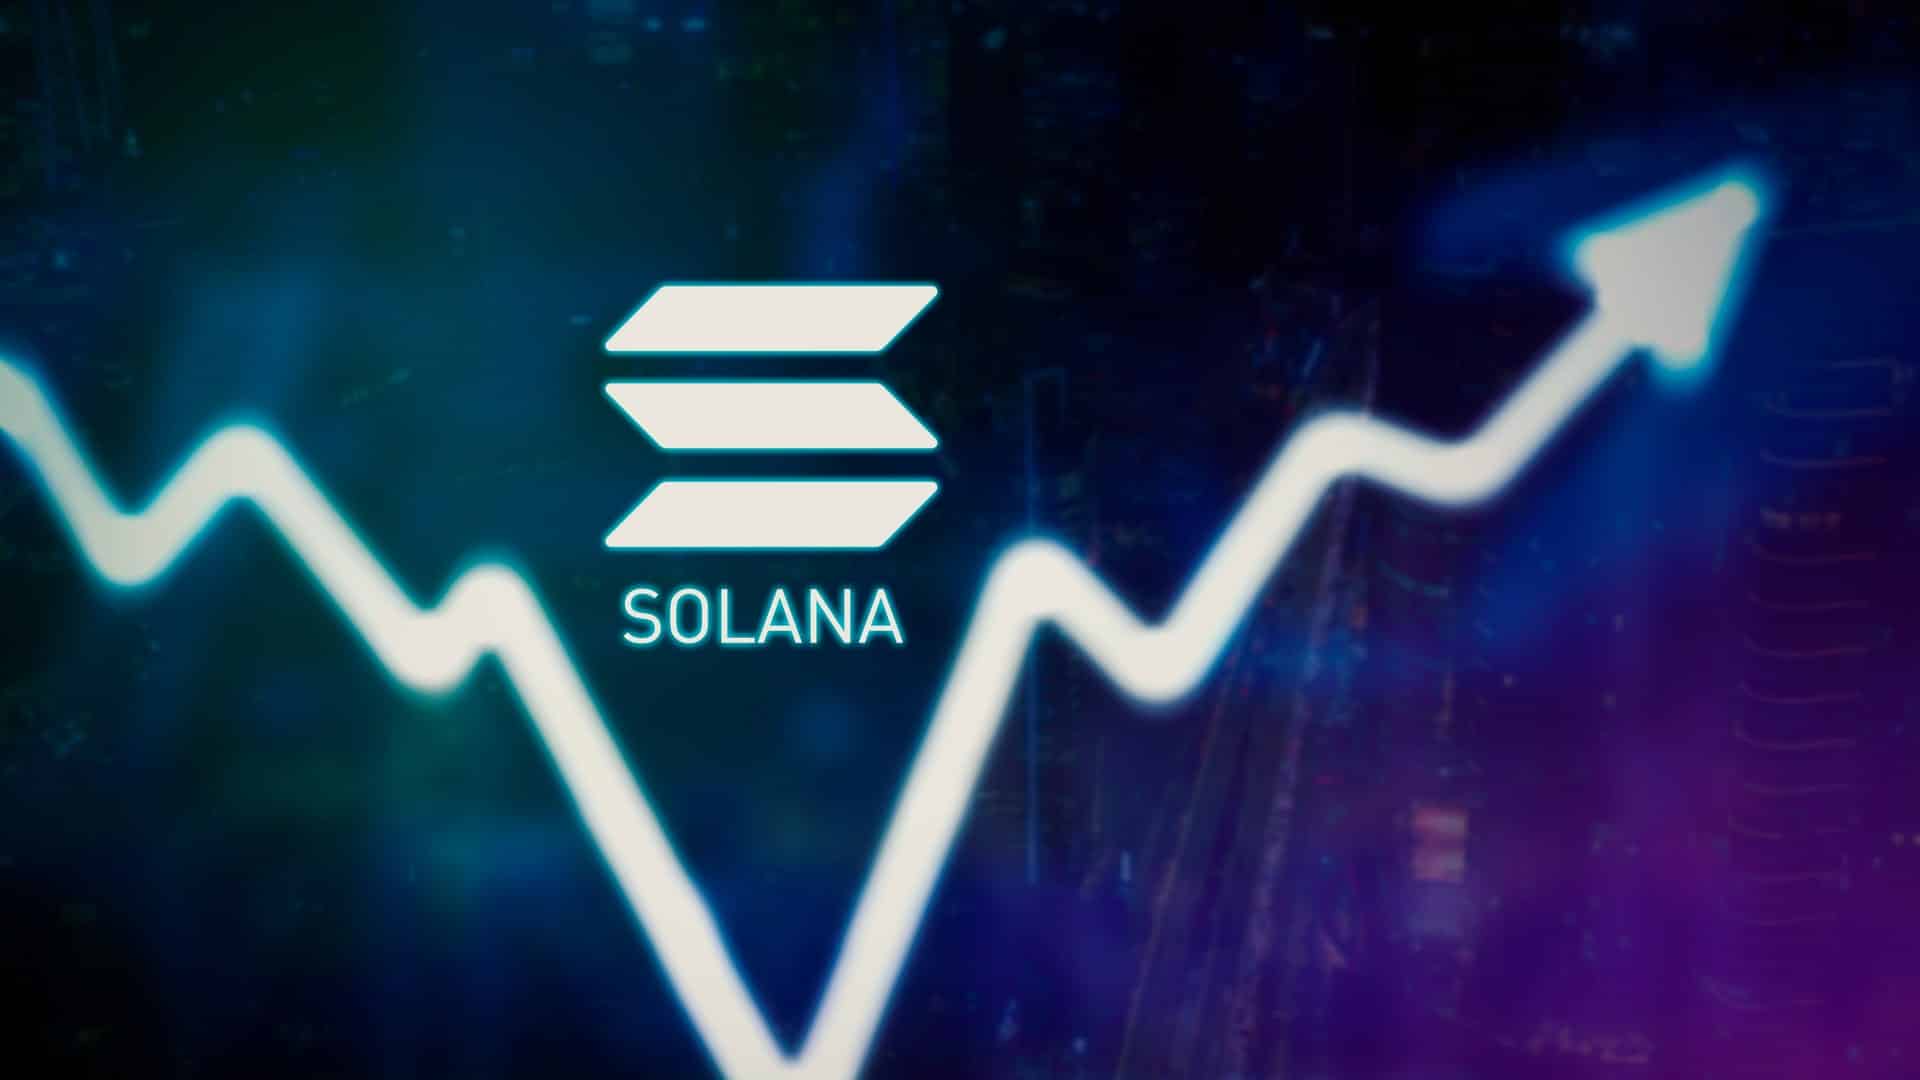 SOL analysis – the price can at any time end the long-term bullish flag